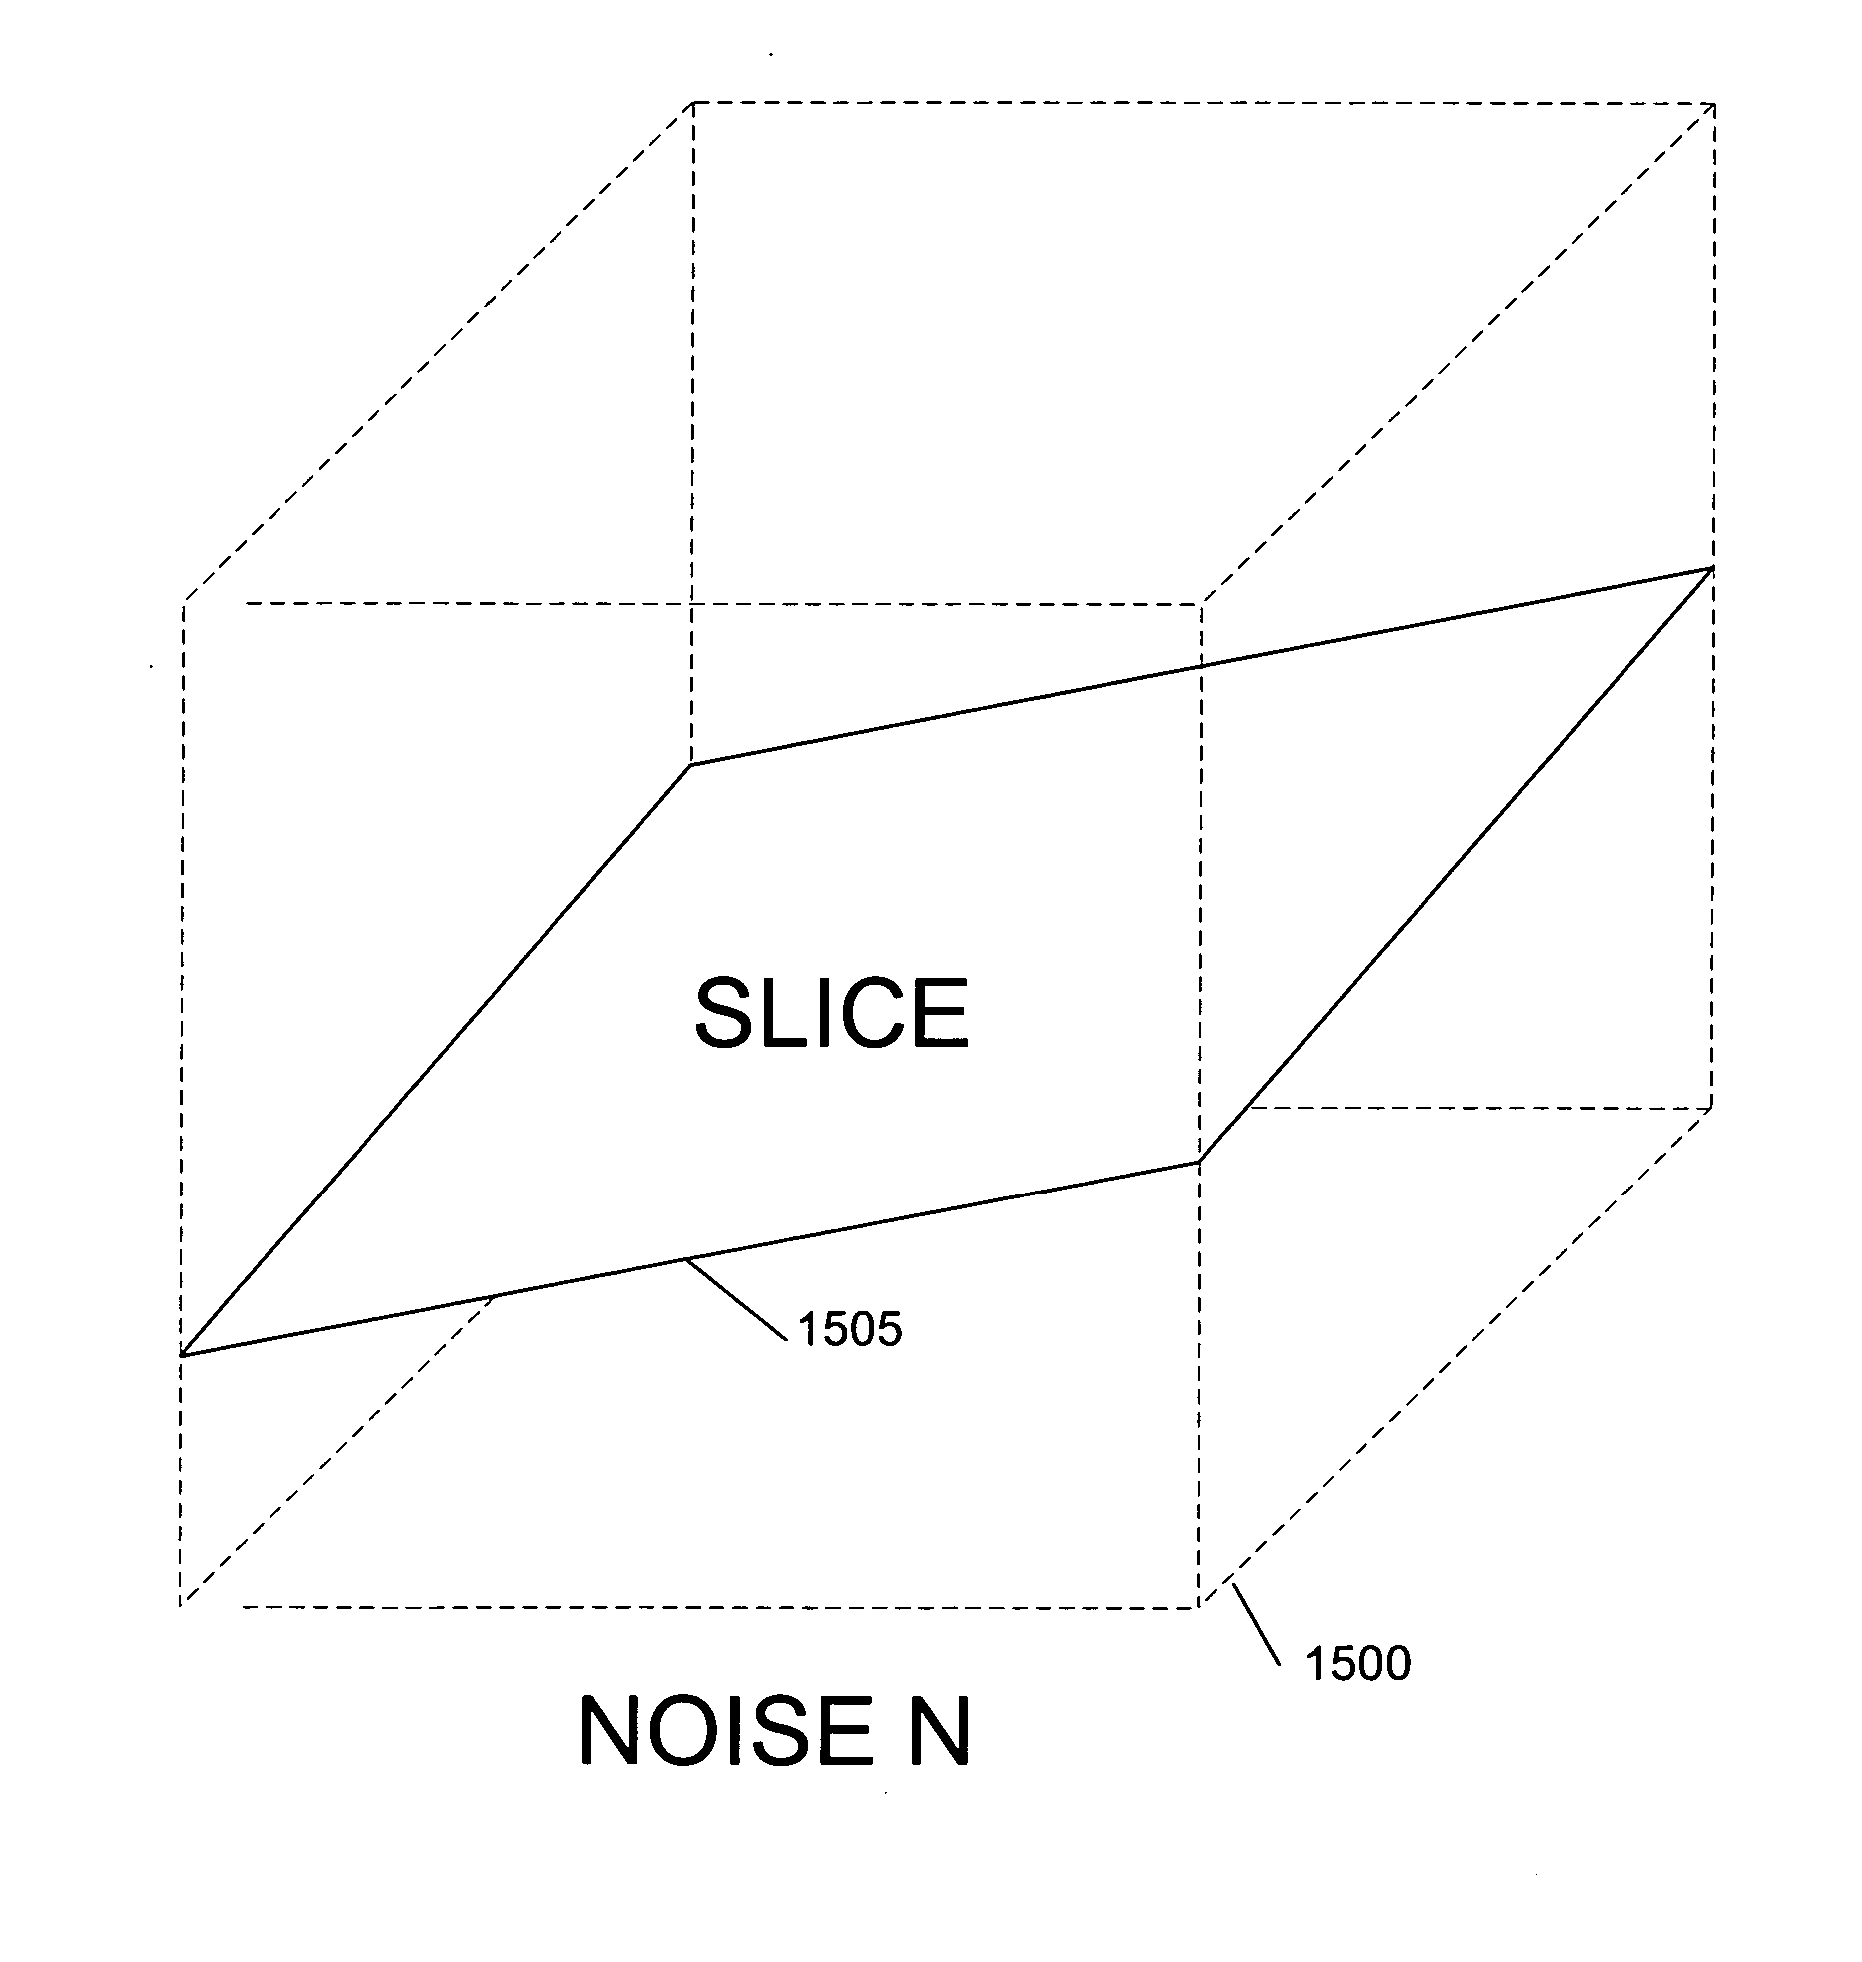 Method of creating and evaluating bandlimited noise for computer graphics